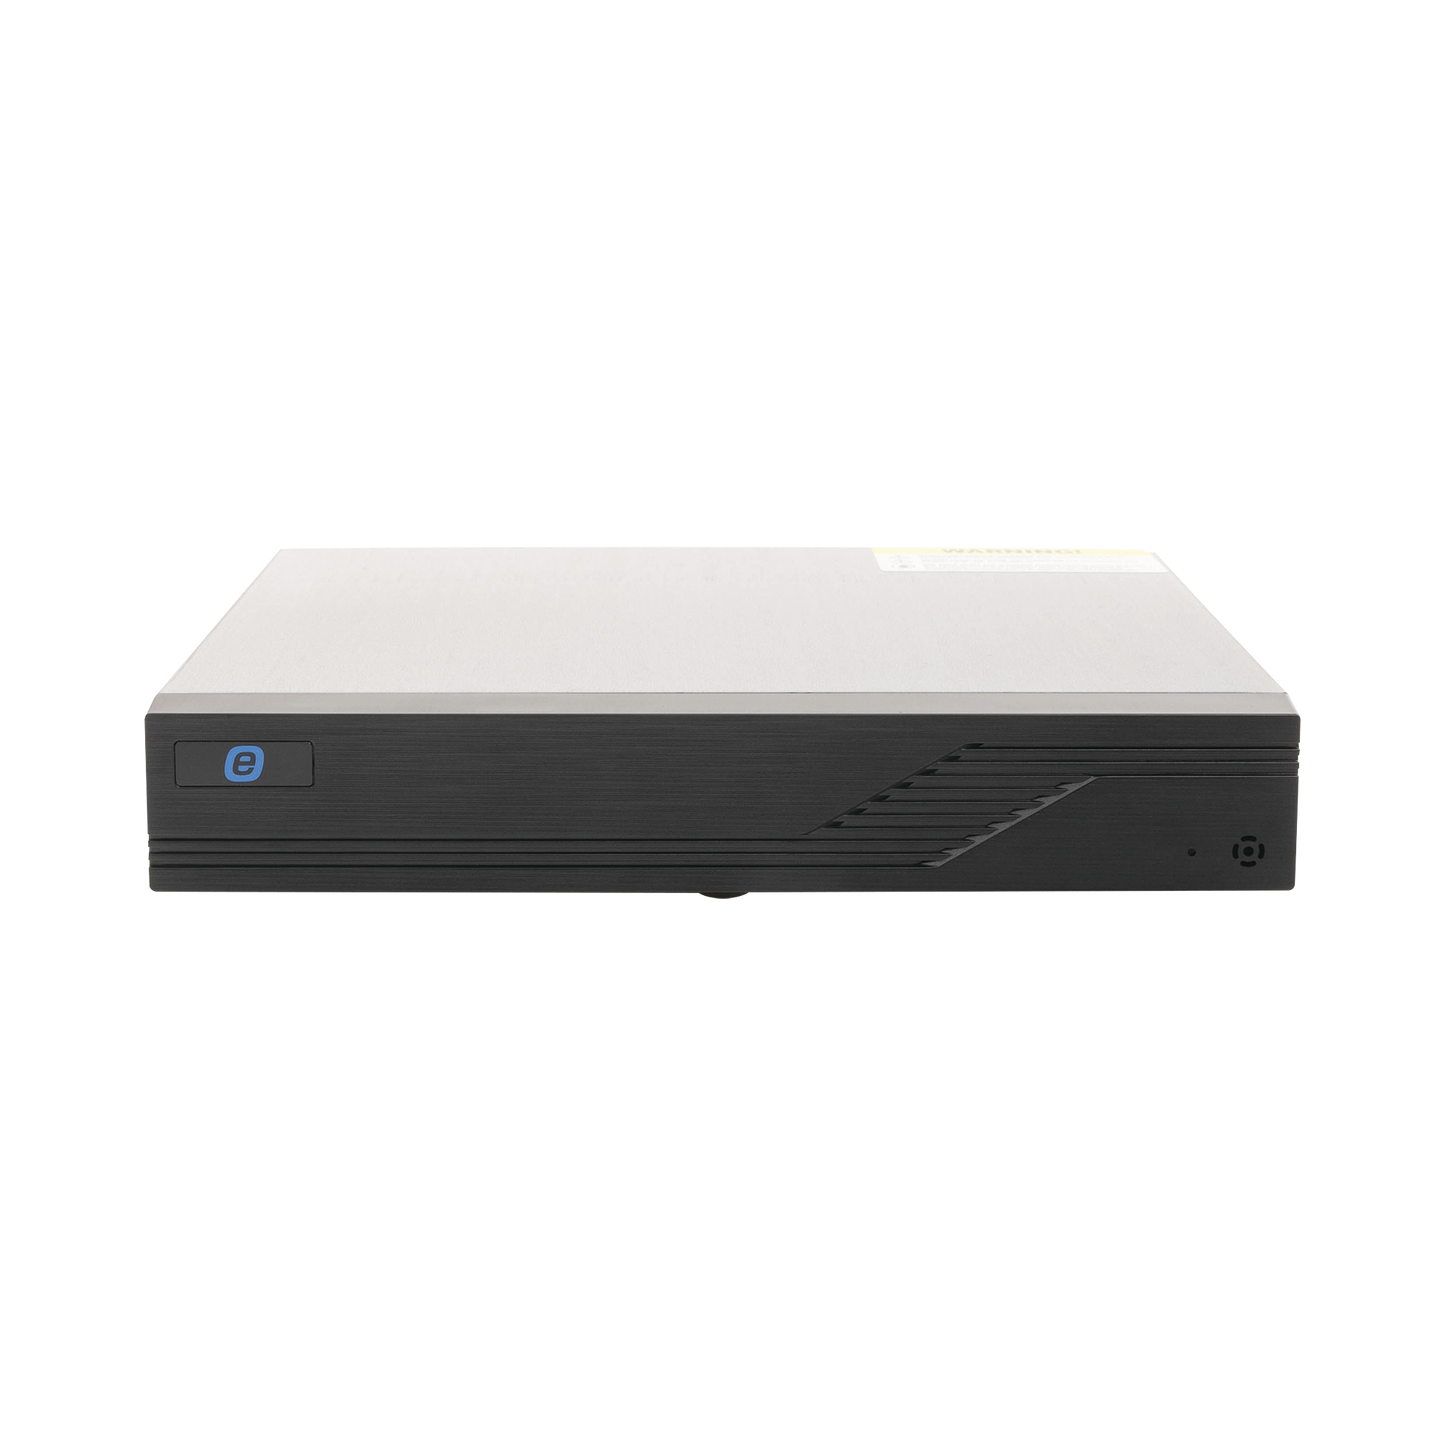 DVR 1080p / 16 Channels TURBOHD + 2 Channels IP / Support 1 Hard Disk / Video Output FULL HD / H.265 / AHD, TVI, CVBS, CVI / 1 Channel Audio / Cloud Video Recording / Supports audio by coaxitron